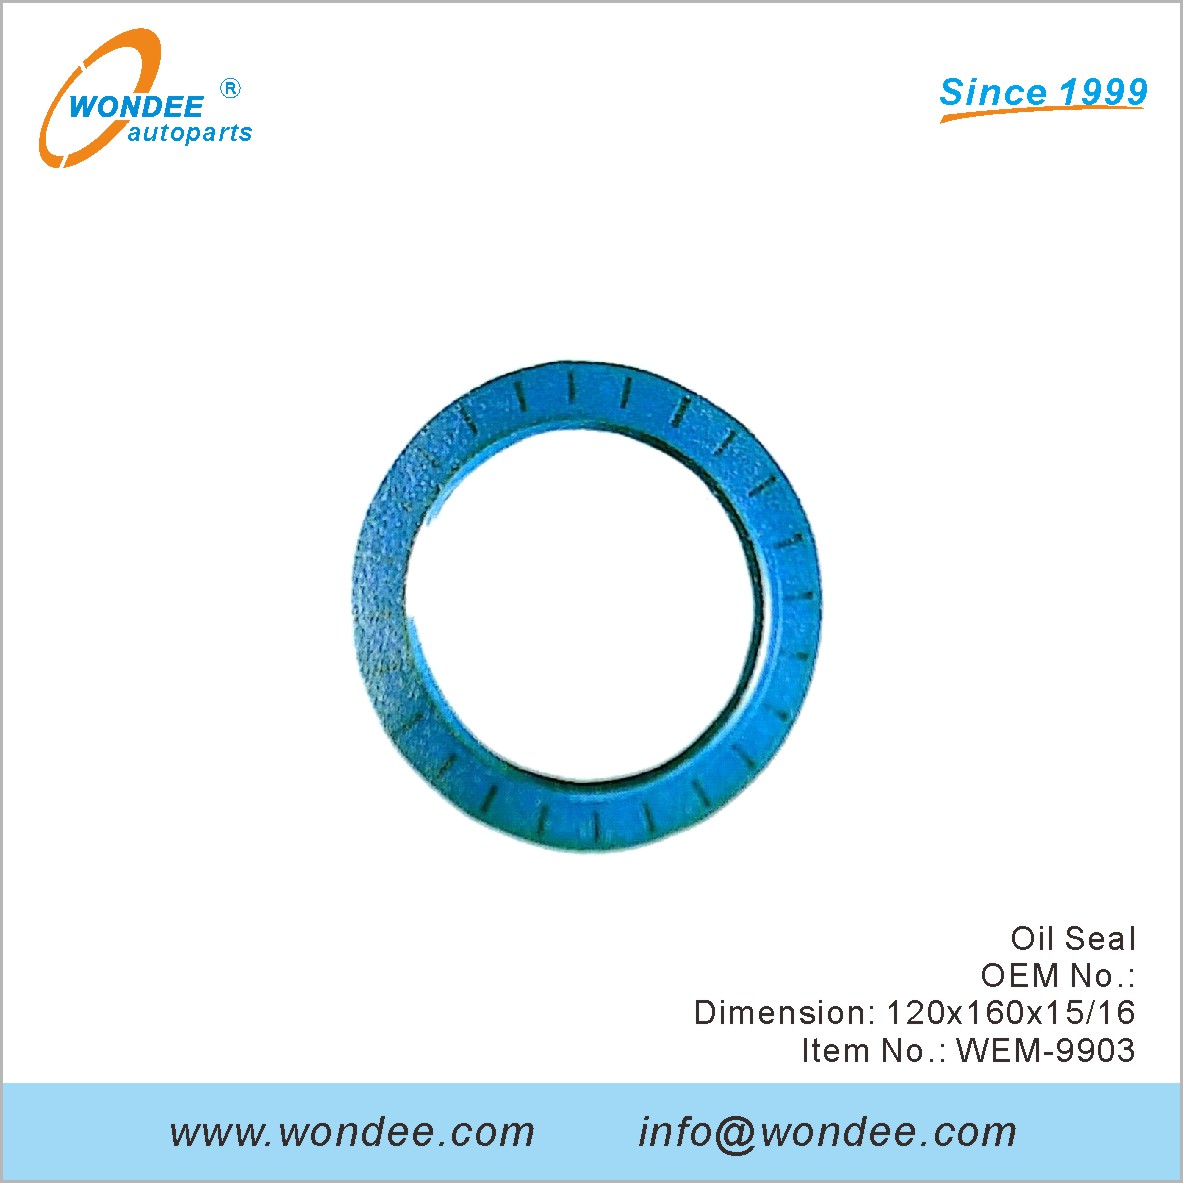 Oil Seal OEM for engine mouting from WONDEE